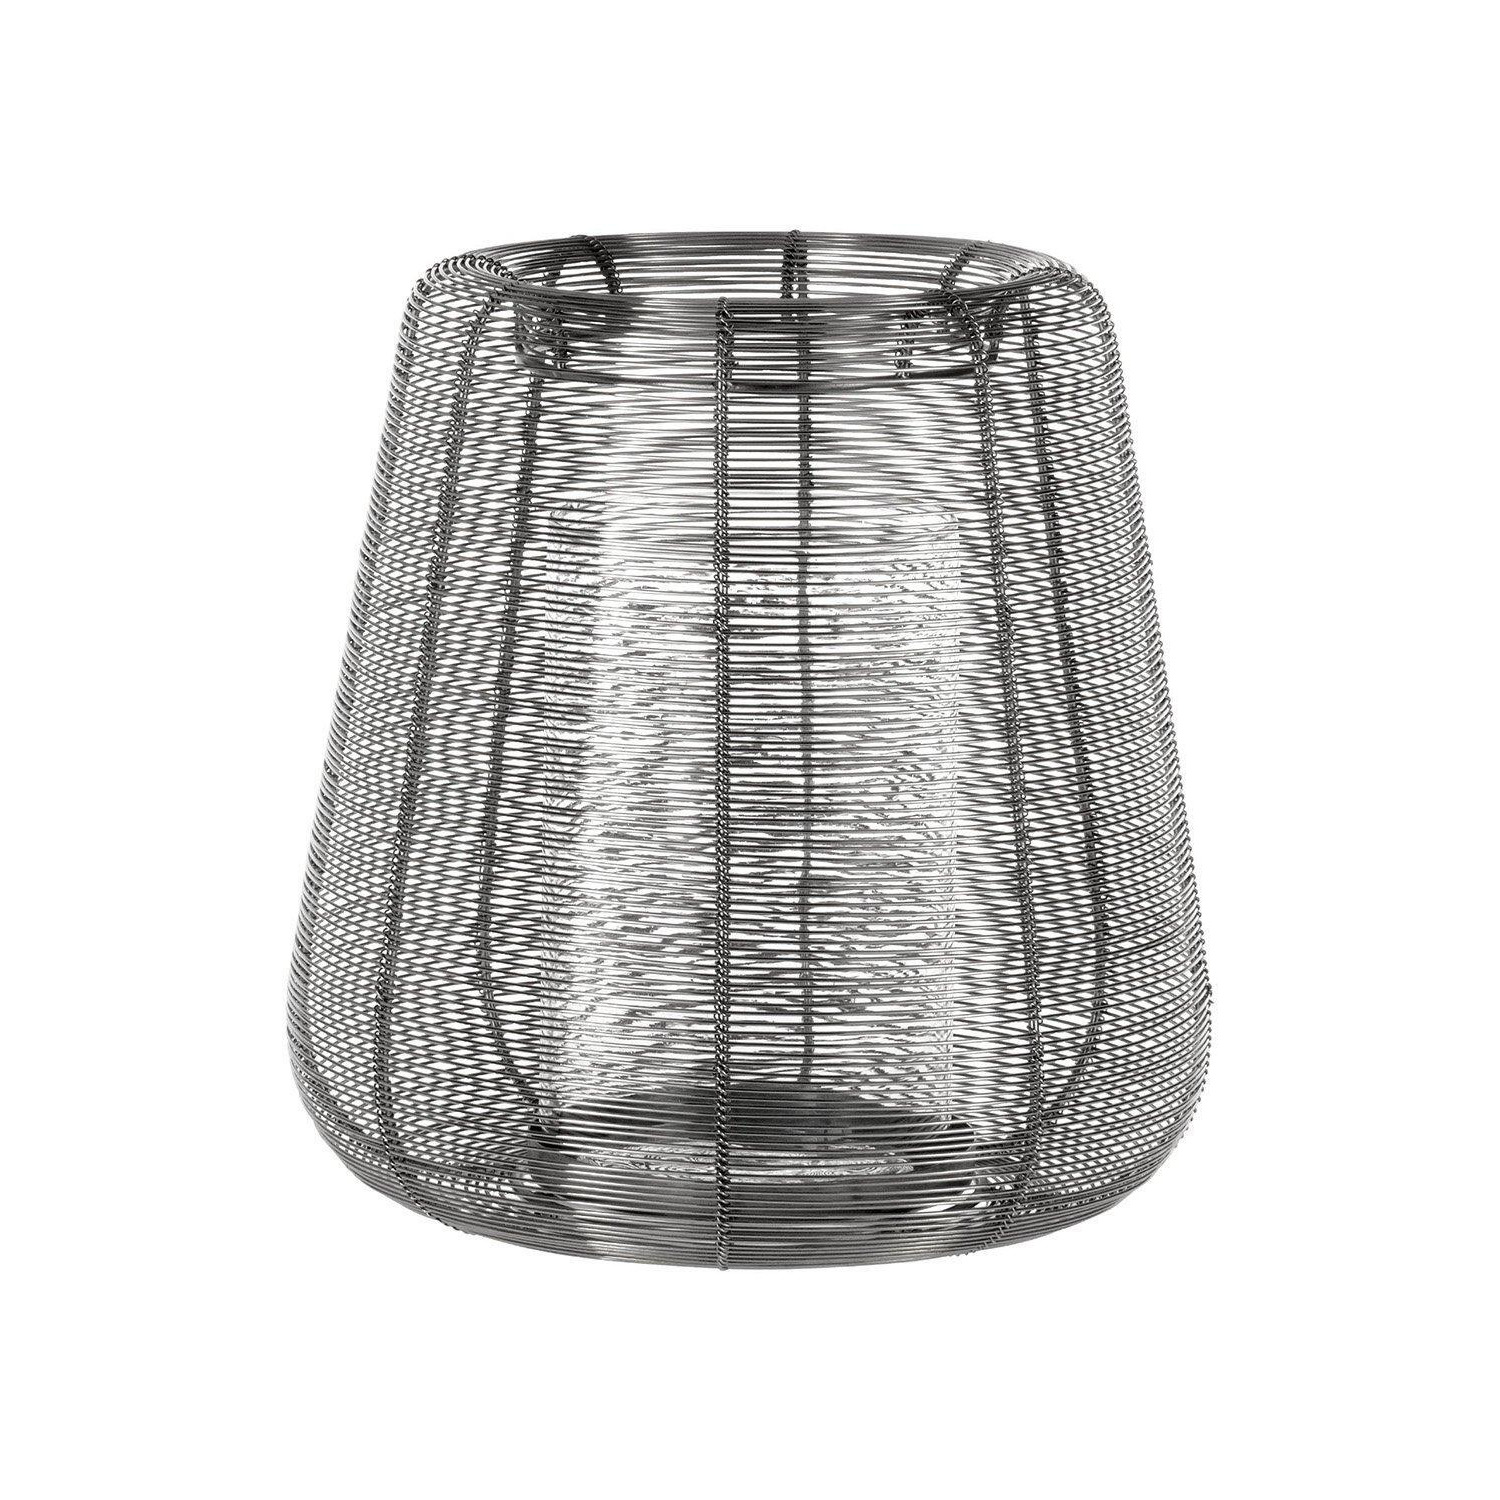 Hagony Candleholder With Silver Wireframe Bowl - image 1